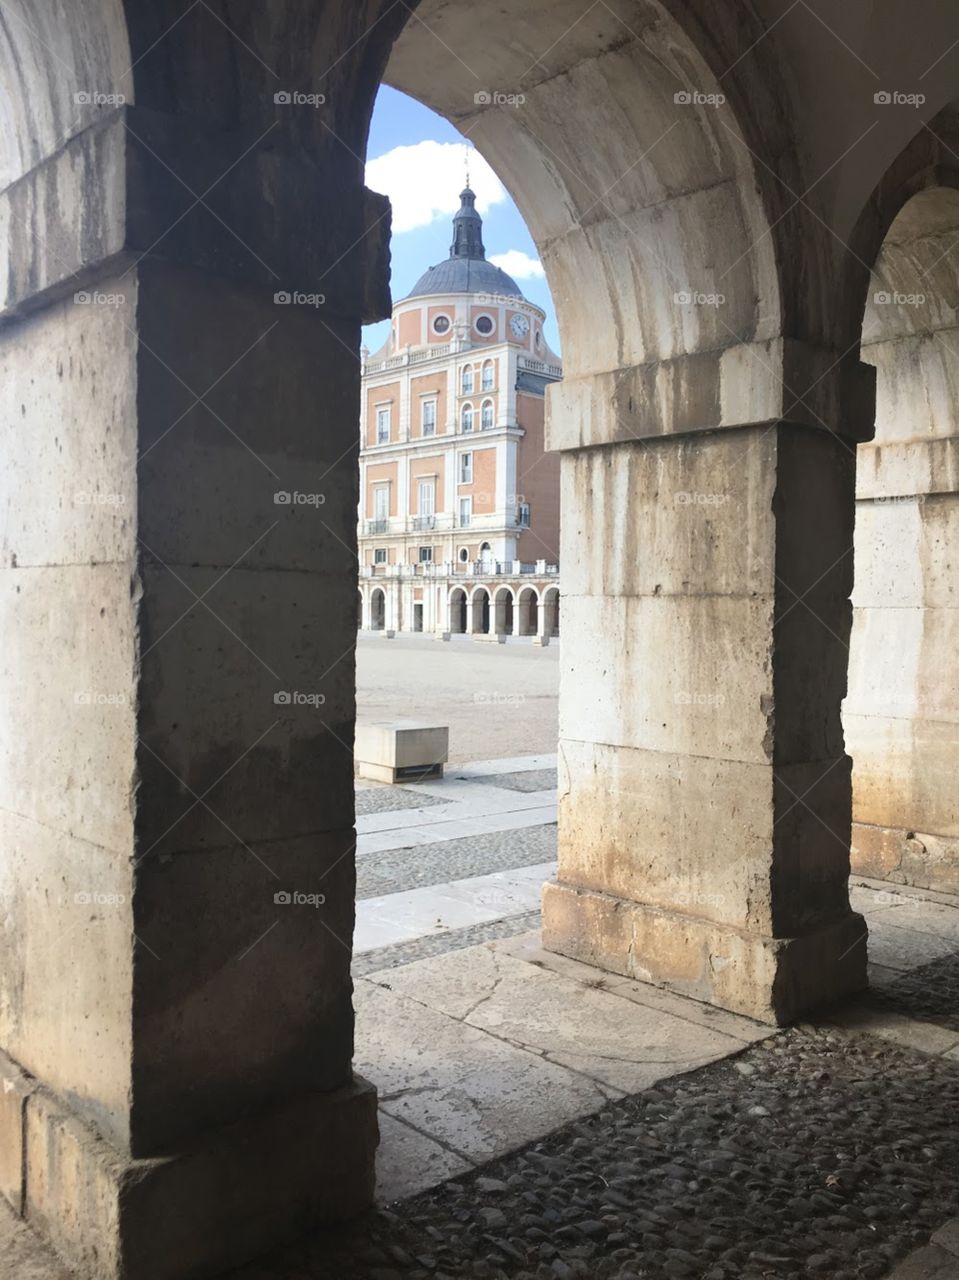 A sneak peak of the Royal Palace through the arches that are across of the Palace.  